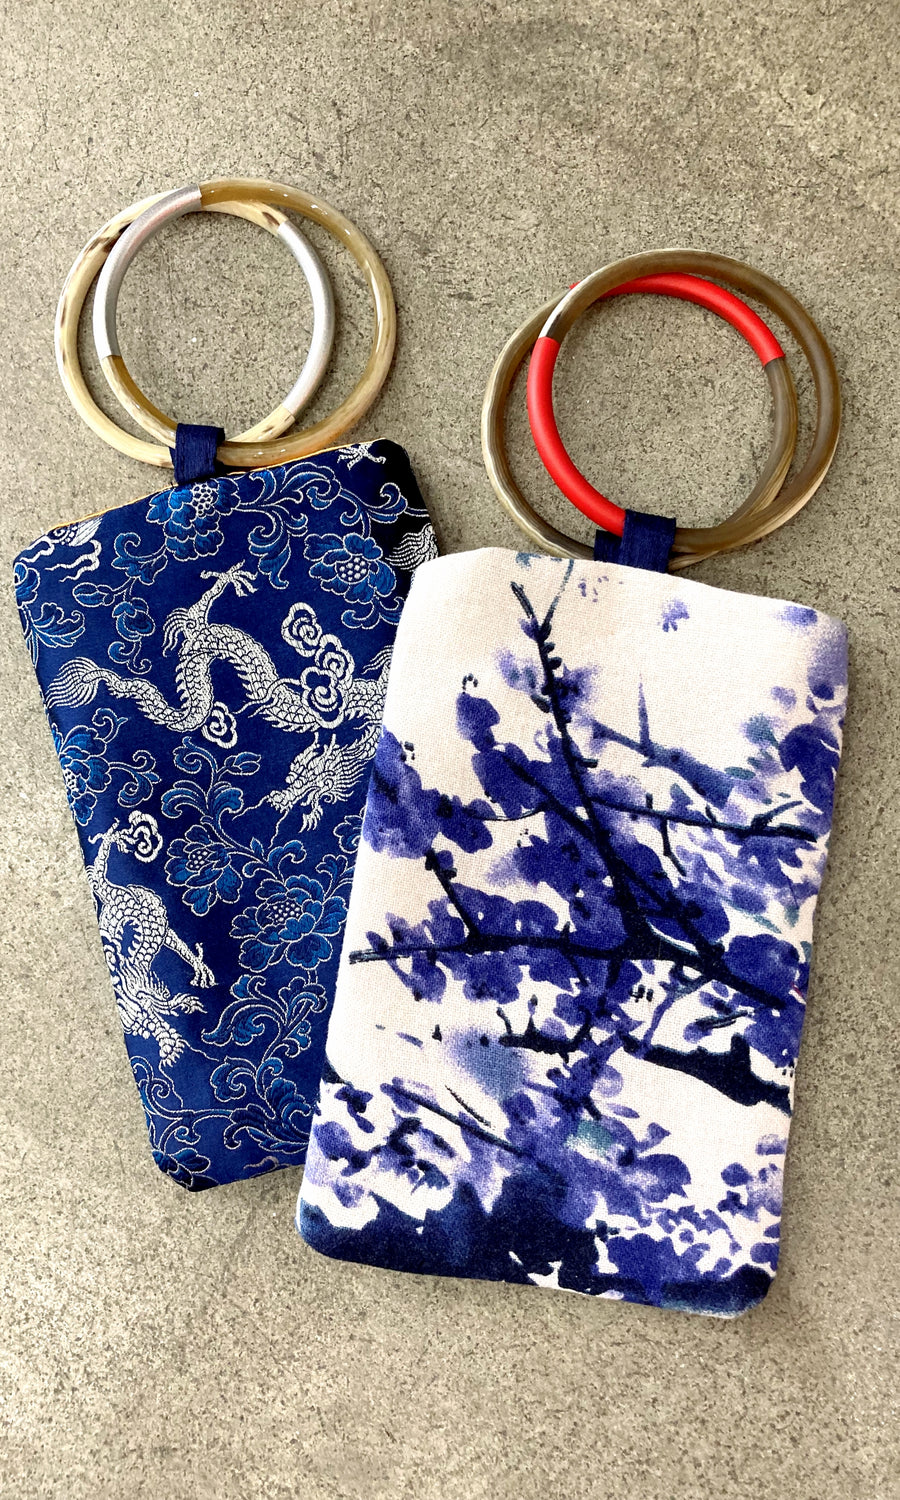 Blue Cell Phone Bangle Bags